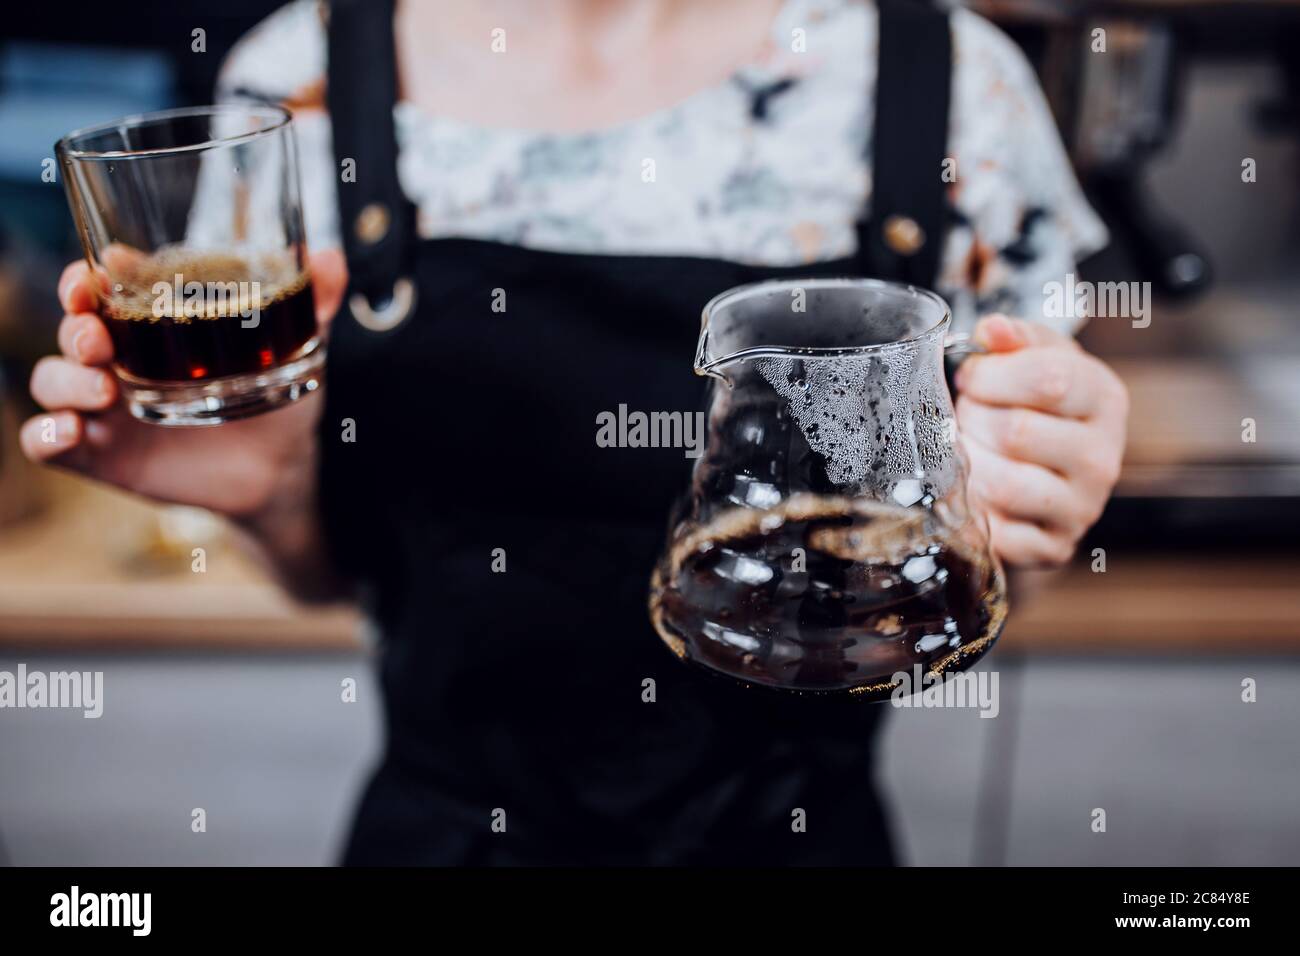 A glass of coffee prepared by a drip method in the female hands of a barista Stock Photo